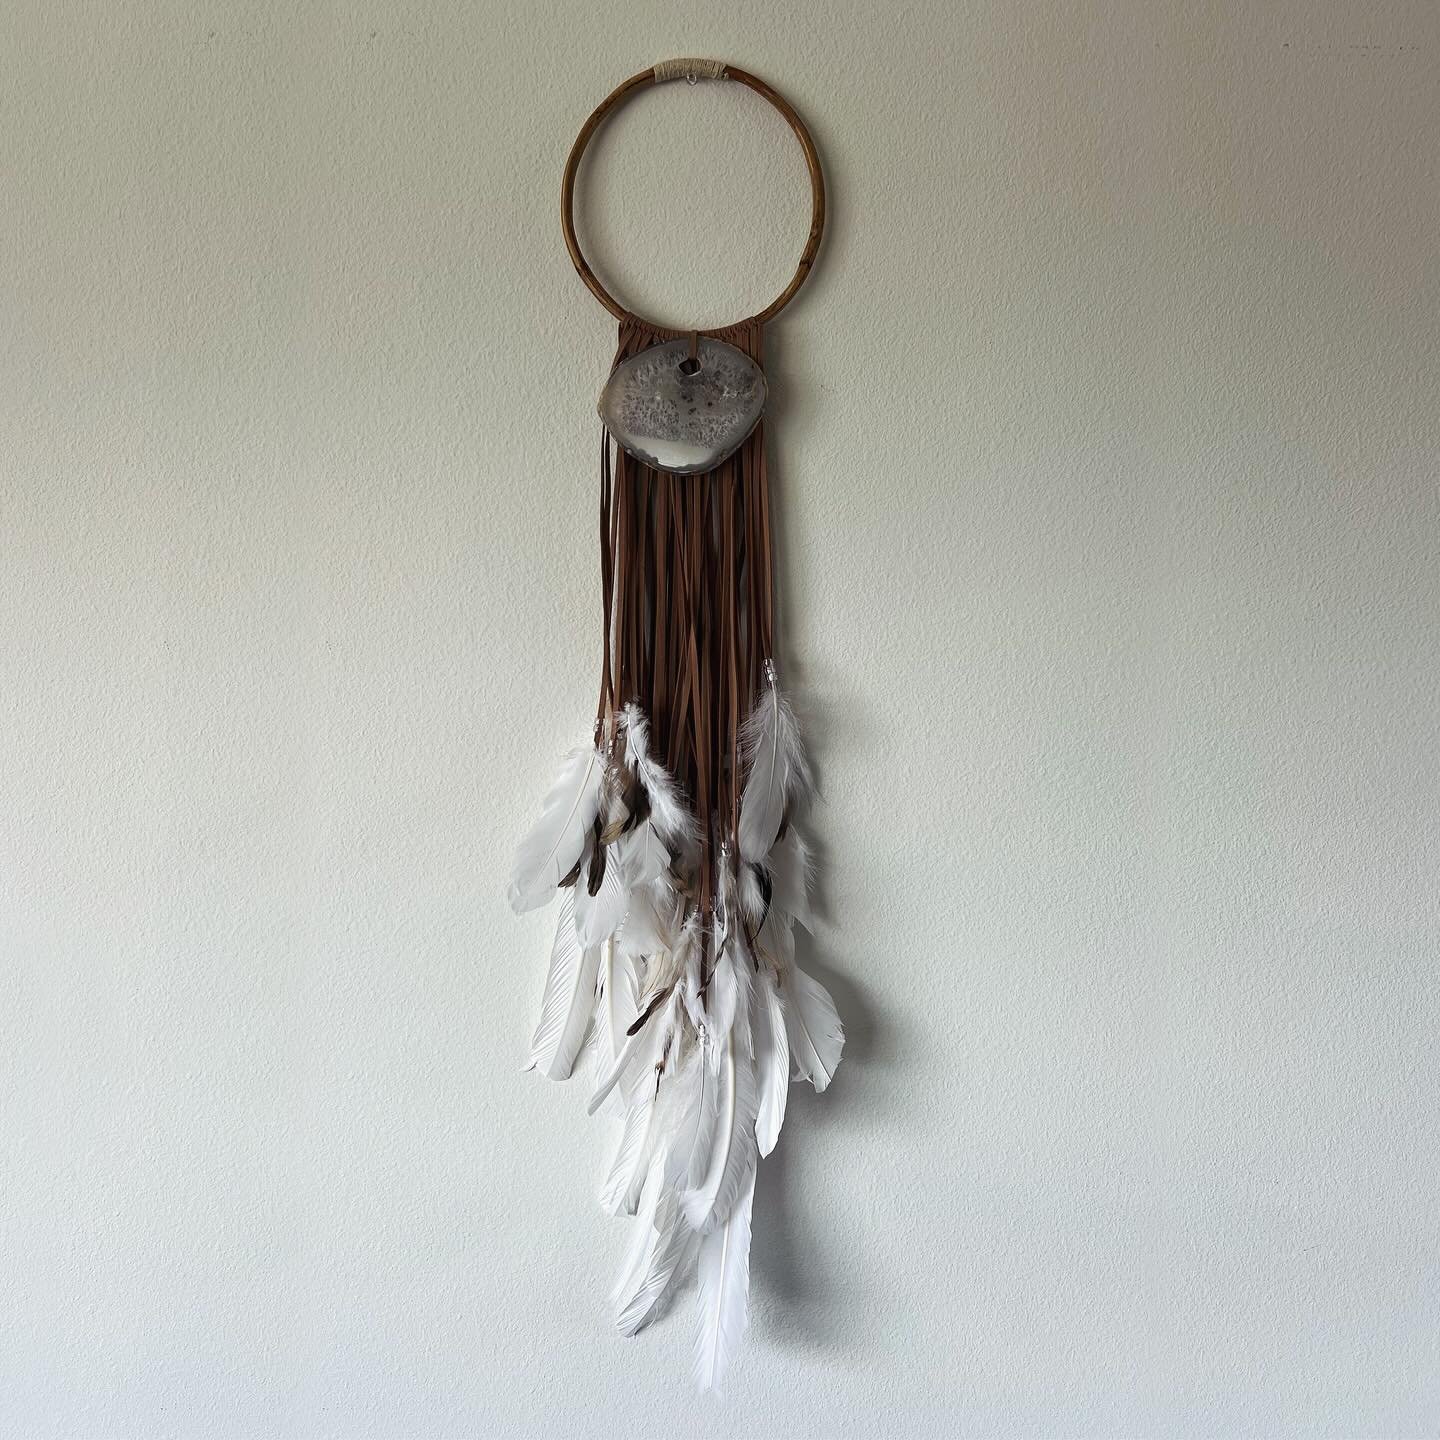 (New!)
CLAUDIA. Medium (8&rdquo; diameter) wall hanging on a wood circle with  tan faux suede cord, layered white with white and multi-colored brown feathers, clear beads and agate center. 

DM me if interested or check site to purchase!

#wallhangin